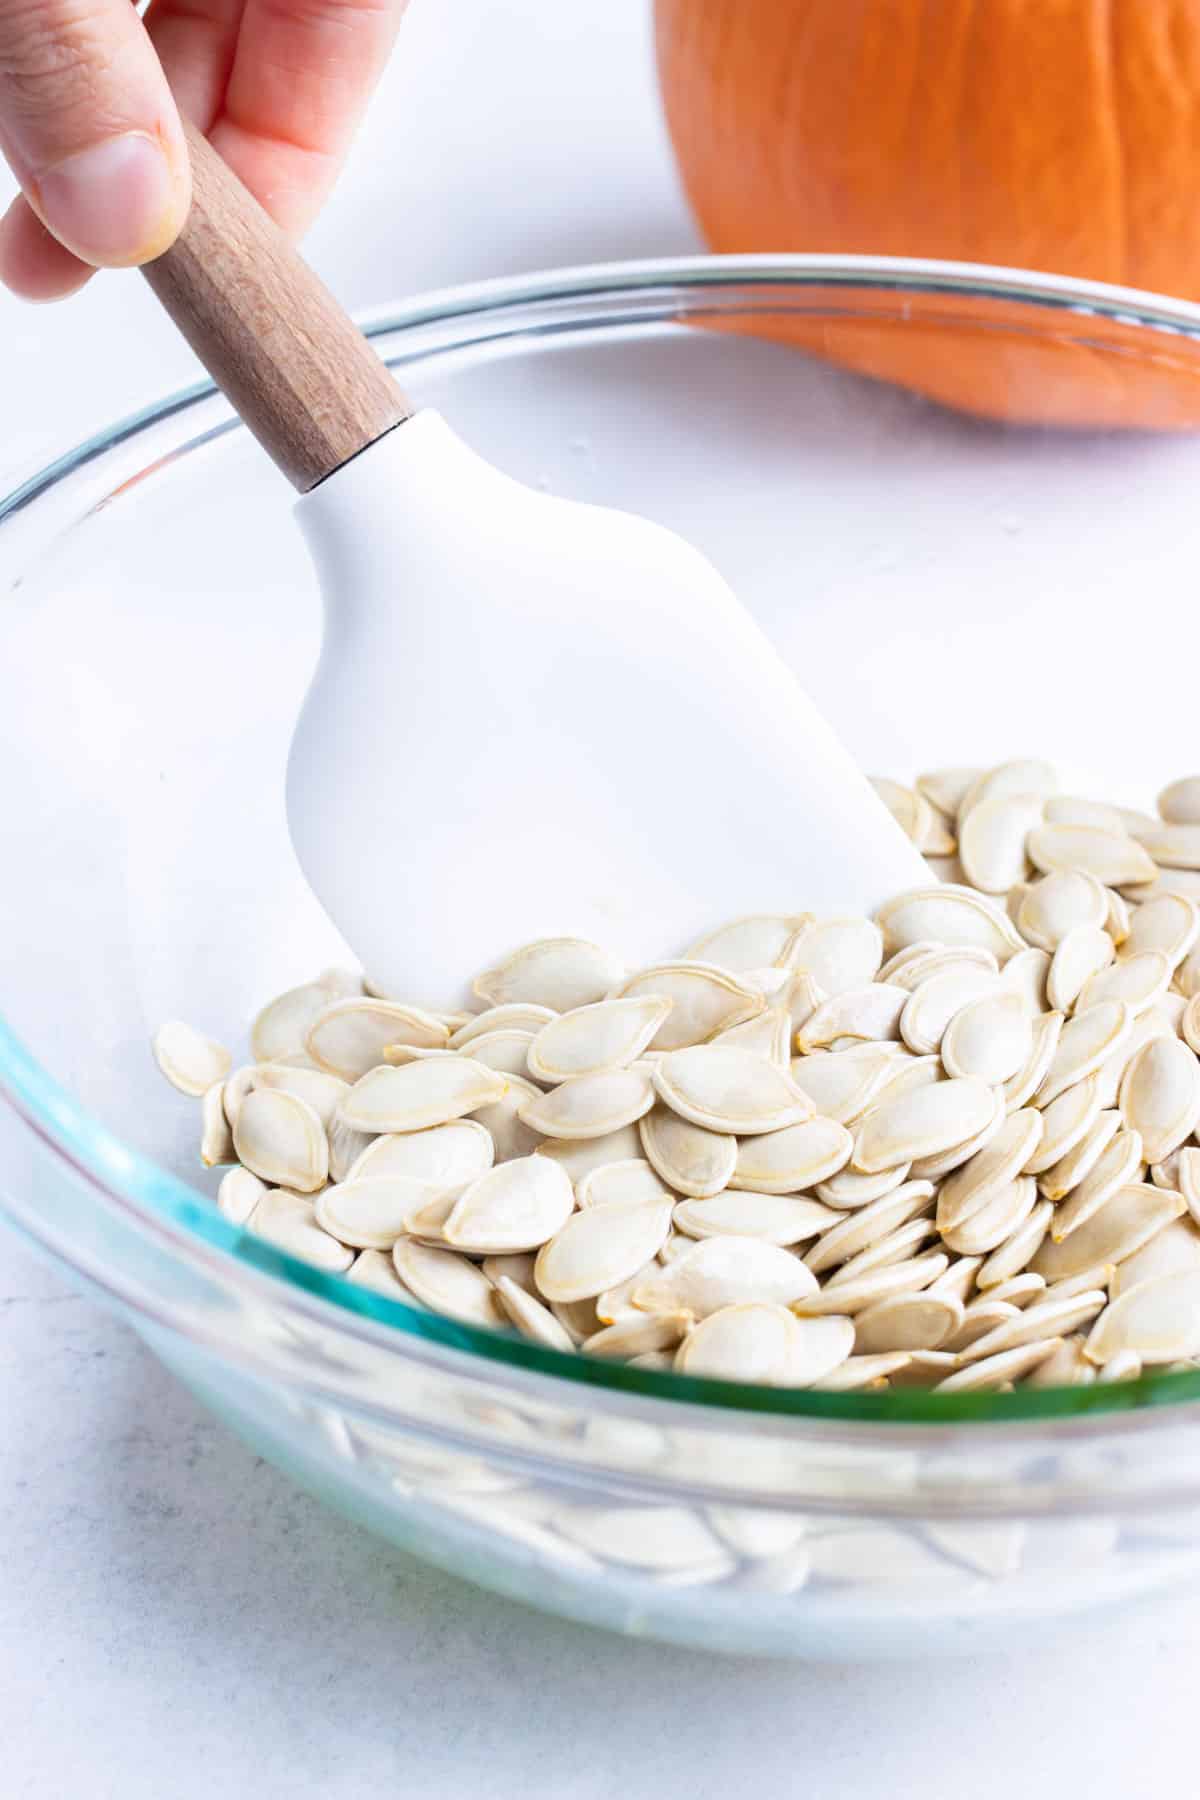 Oil or butter, pumpkin seeds, and seasonings are combined in a bowl and mixed.